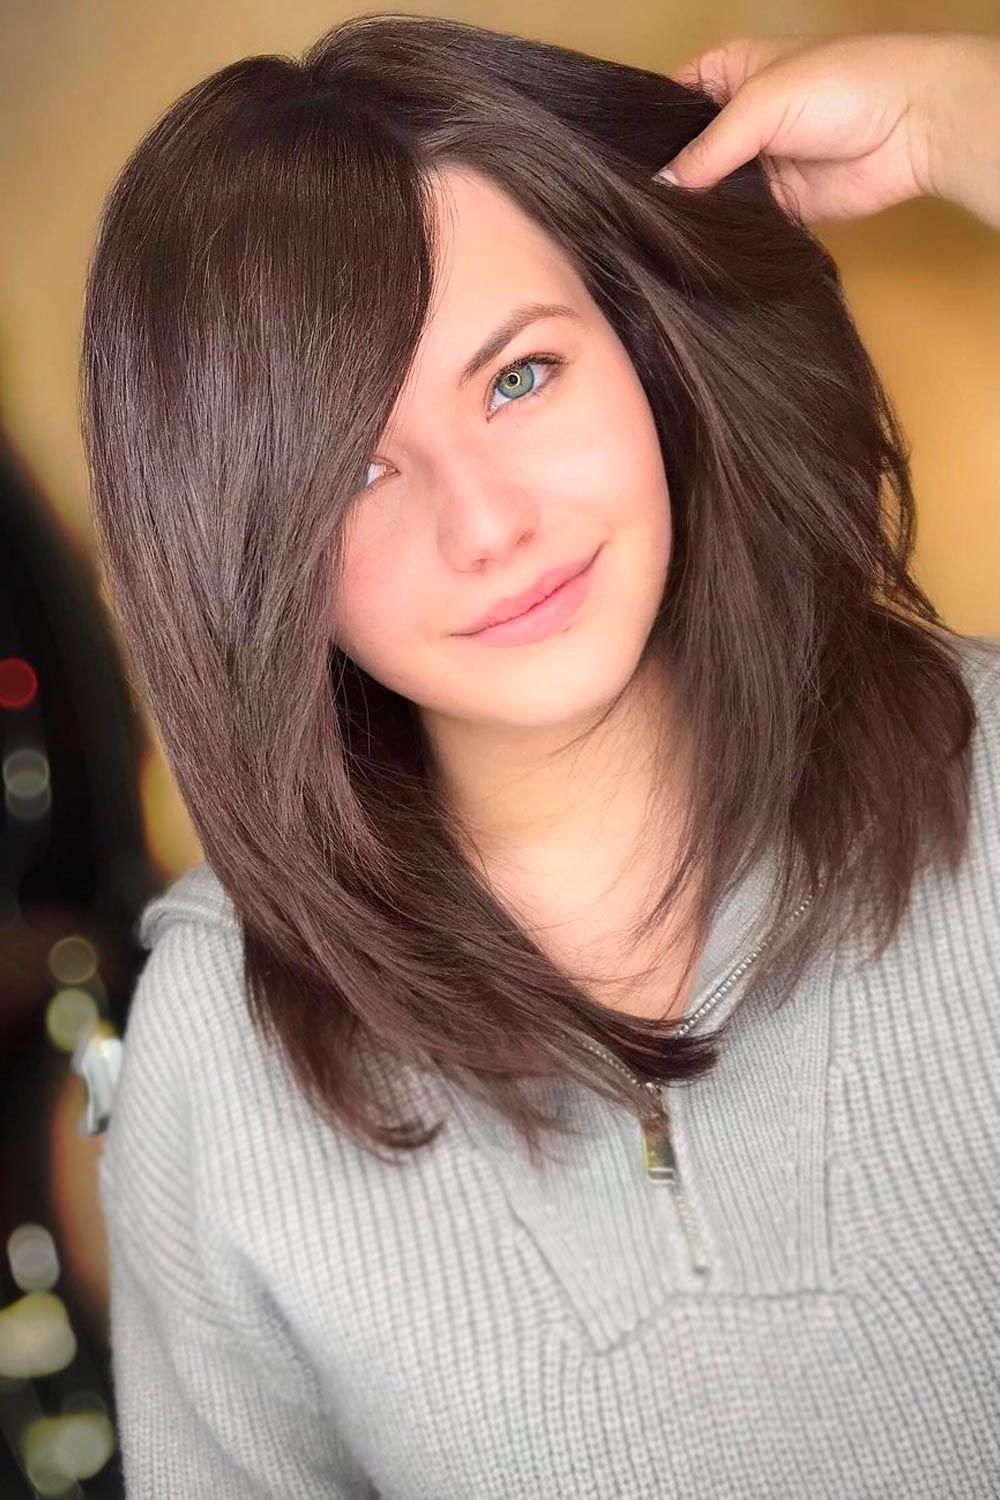 Untraditional Lob Haircut Ideas To Give A Try | Lovehairstyles Regarding Most Current Side Parted Angled Chocolate Lob Haircuts (View 7 of 25)